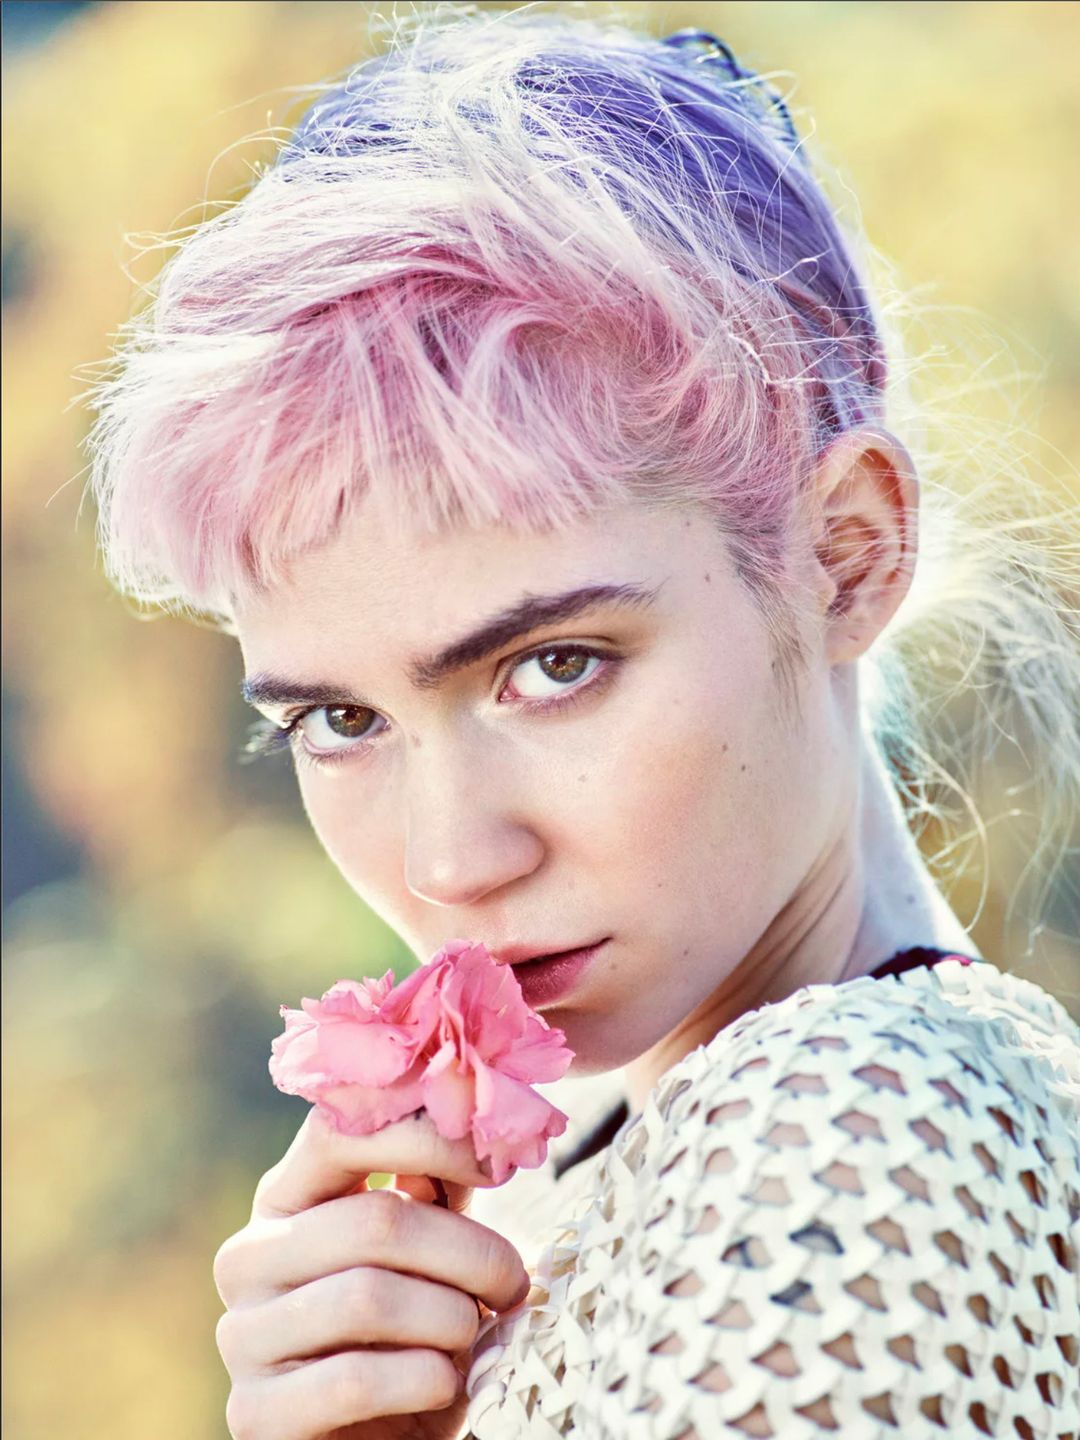 Grimes where did she study